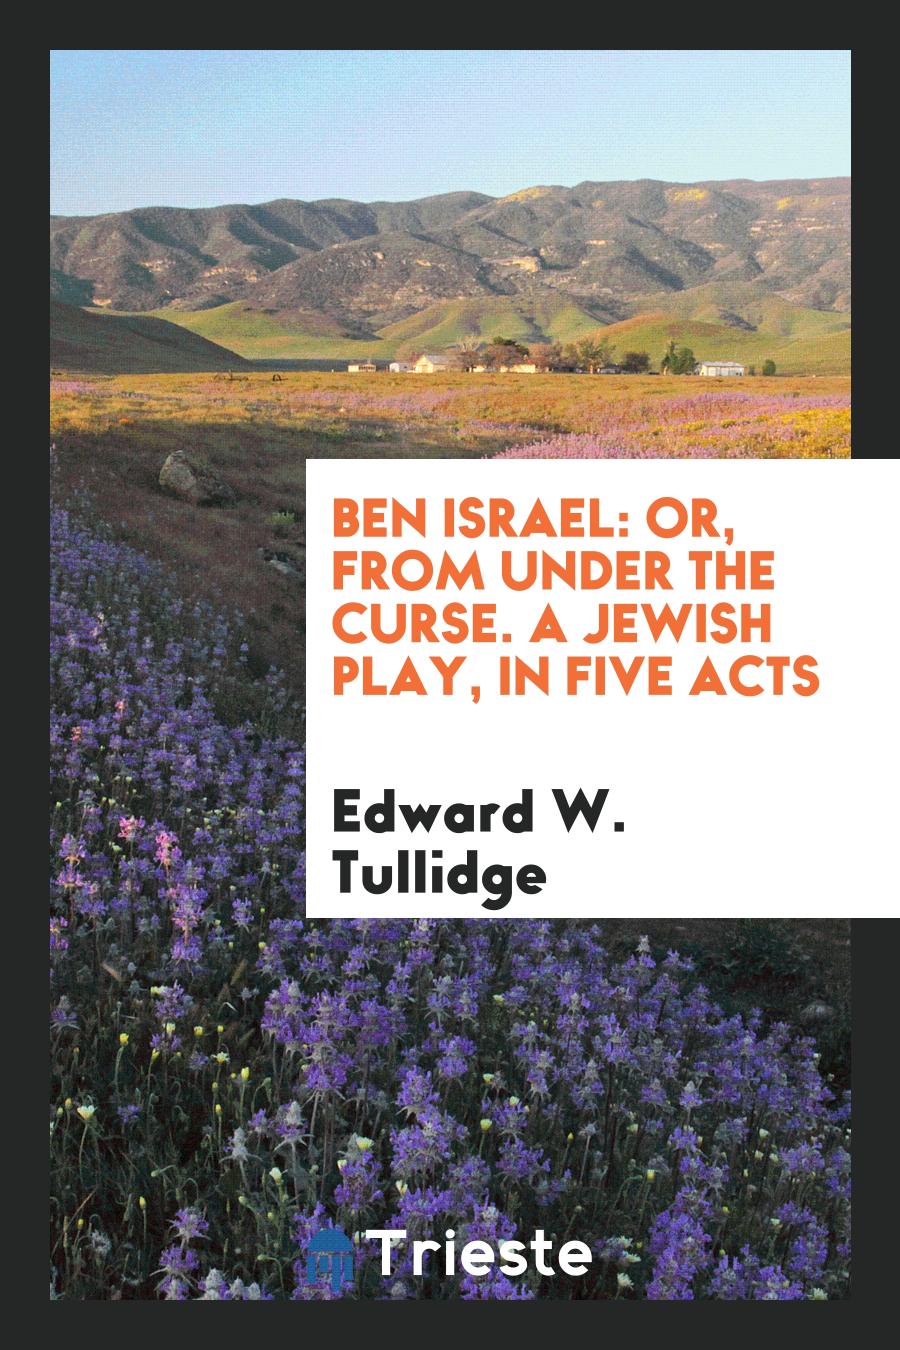 Ben Israel: Or, From Under the Curse. A Jewish Play, In Five Acts